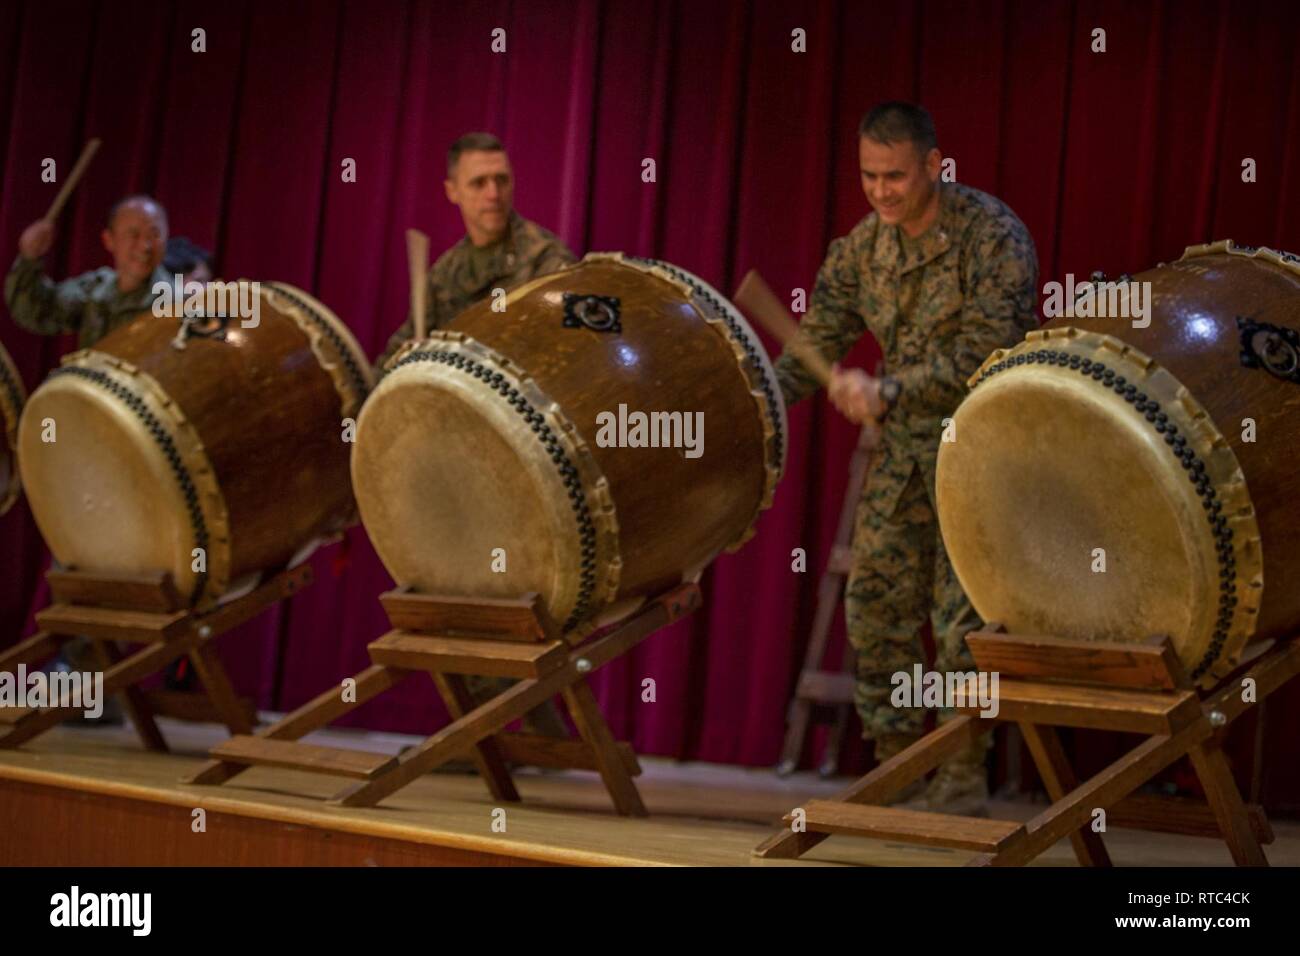 U.S. Marine Corps Maj. Gen. Robert Castellvi, Col. Kevin Clark and Japan Ground Self-Defense Force Maj. Gen. Shinichi Aoki participate in a drum performance during the closing ceremony for exercise Iron Fist 2019, Feb. 8, on U.S. Marine Corps Base Camp Pendleton, Calif. Exercise Iron Fist is an annual, multilateral training exercise where U.S. and Japanese service members train together and share techniques, tactics and procedures to improve their combined operational capabilities. Stock Photo